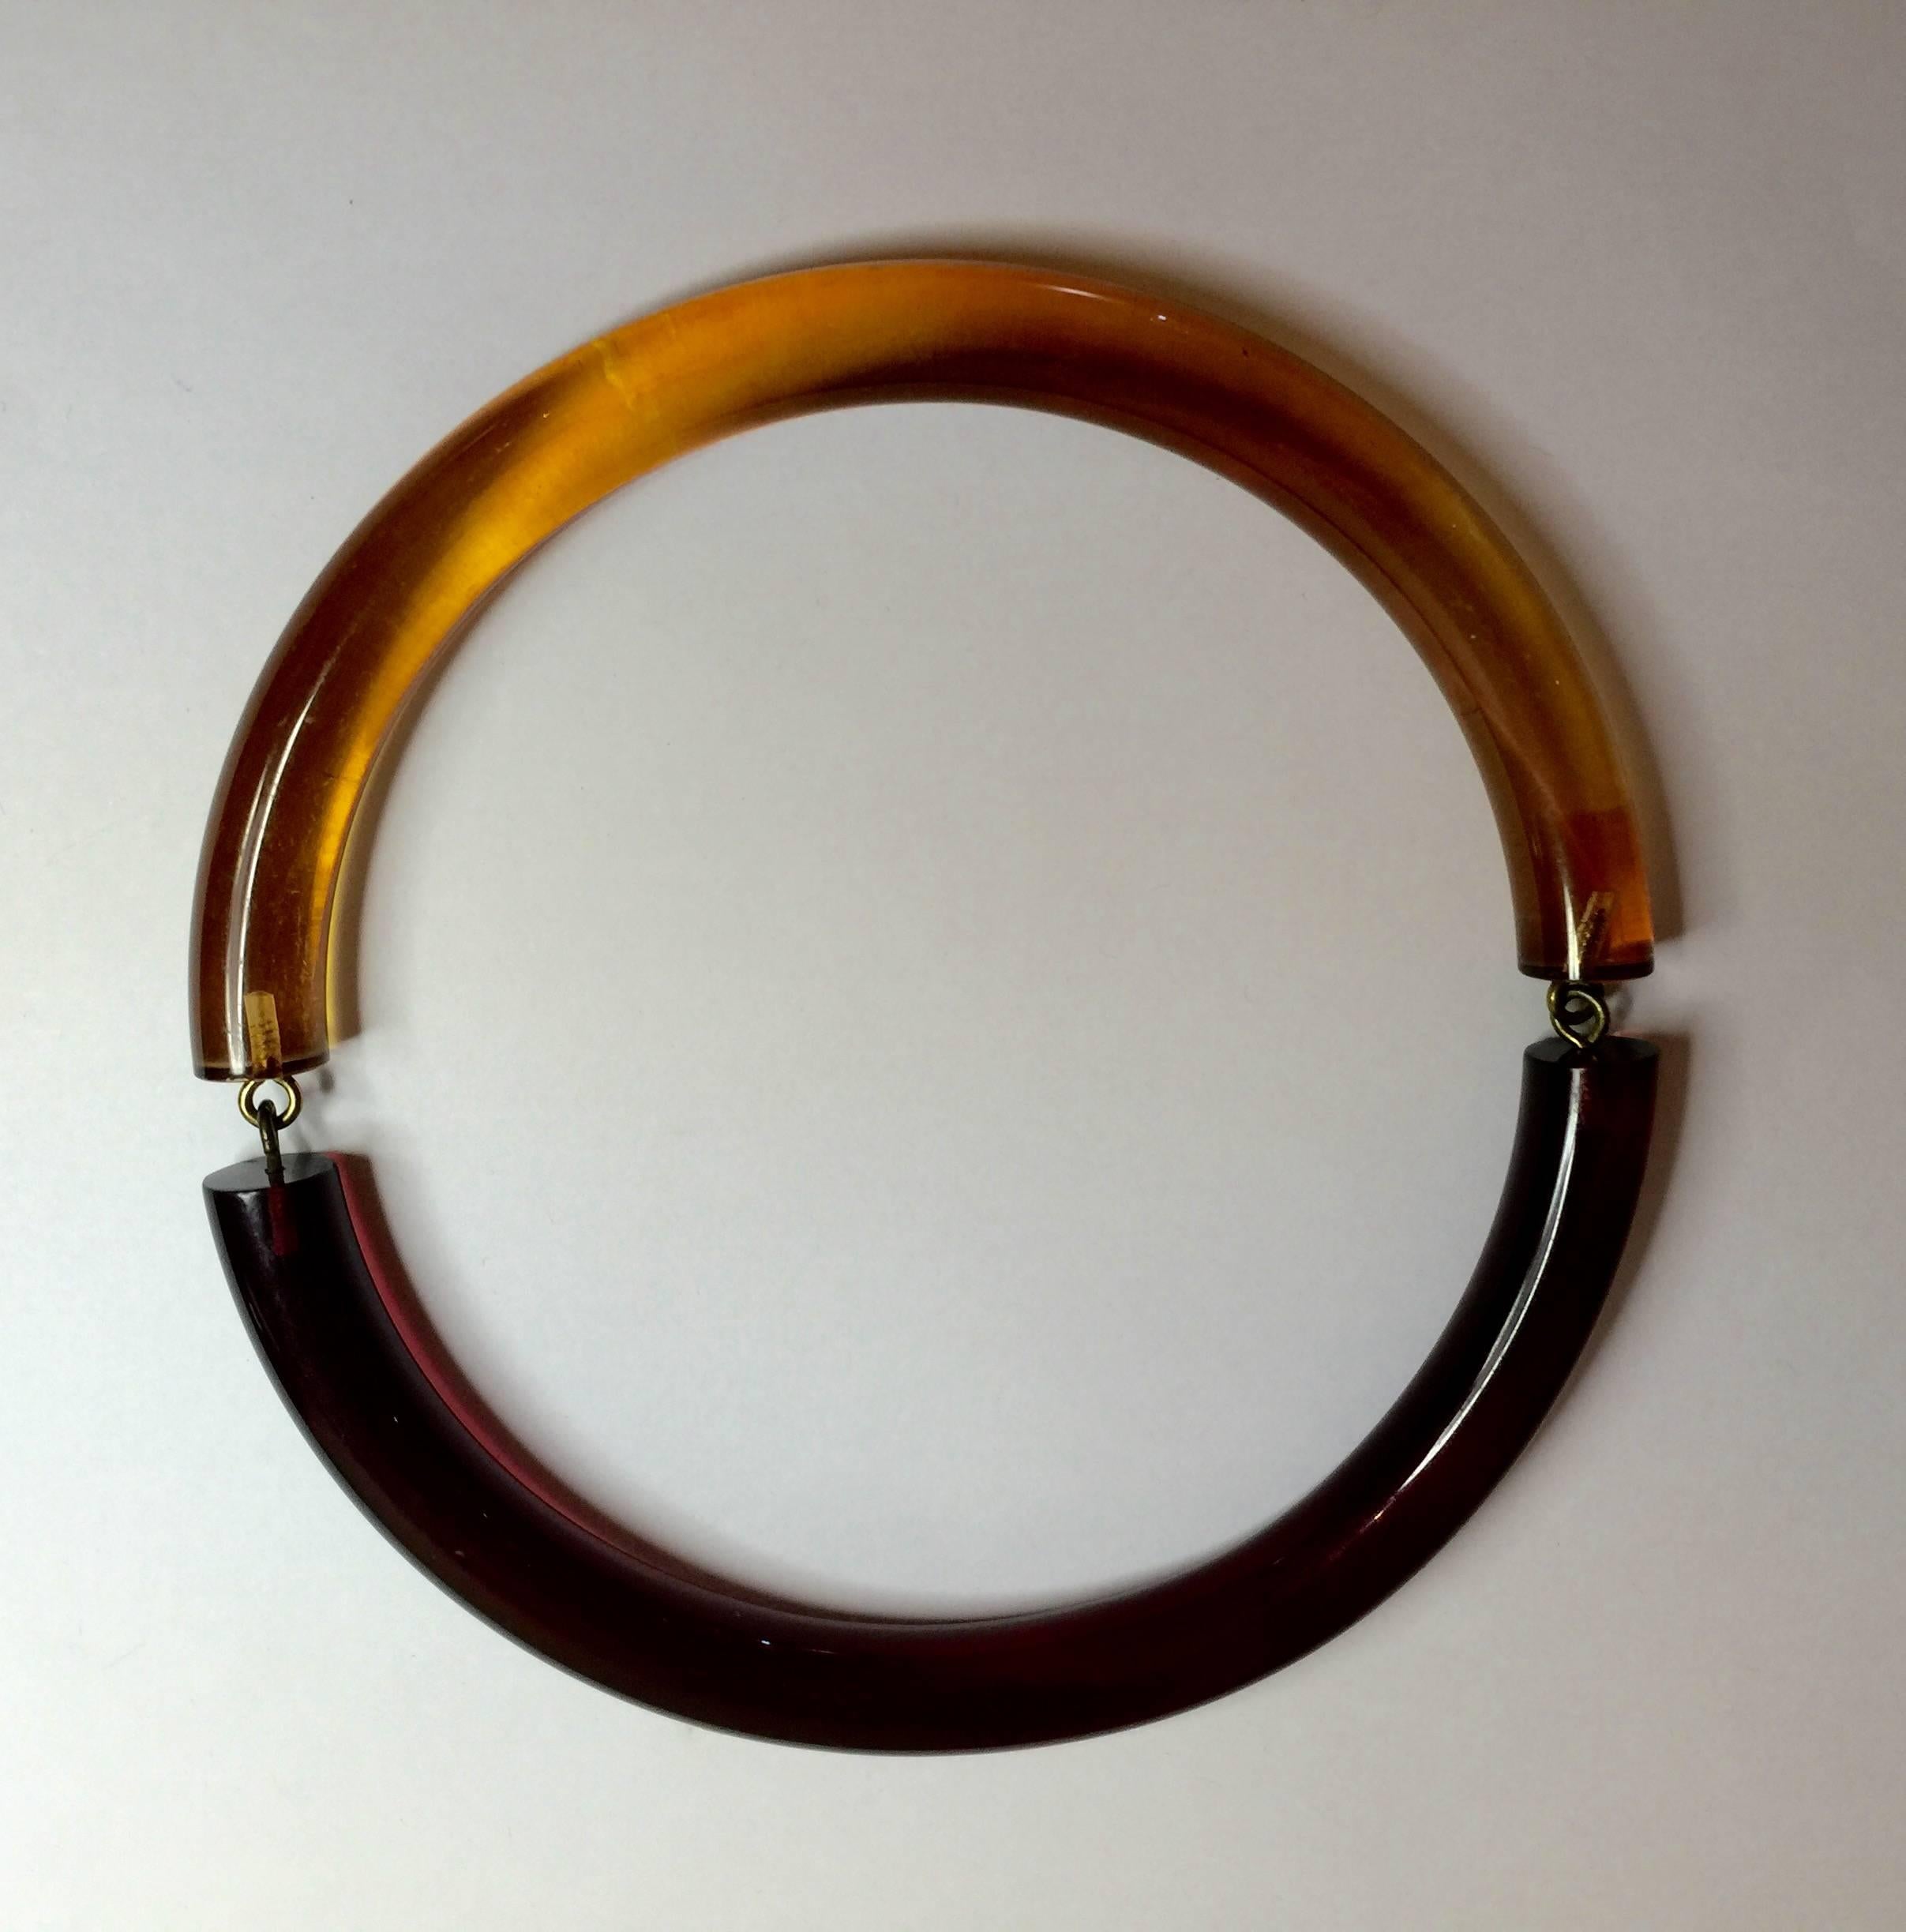 A classic vintage Judith Hendler Acri-Gems neck ring collar necklace. Simple, geometric, elegant. Half amber acrylic bottom, half deep purple acrylic top. Classic C-ring and O-ring closure always is on the wearer's left, but the necklace can be worn